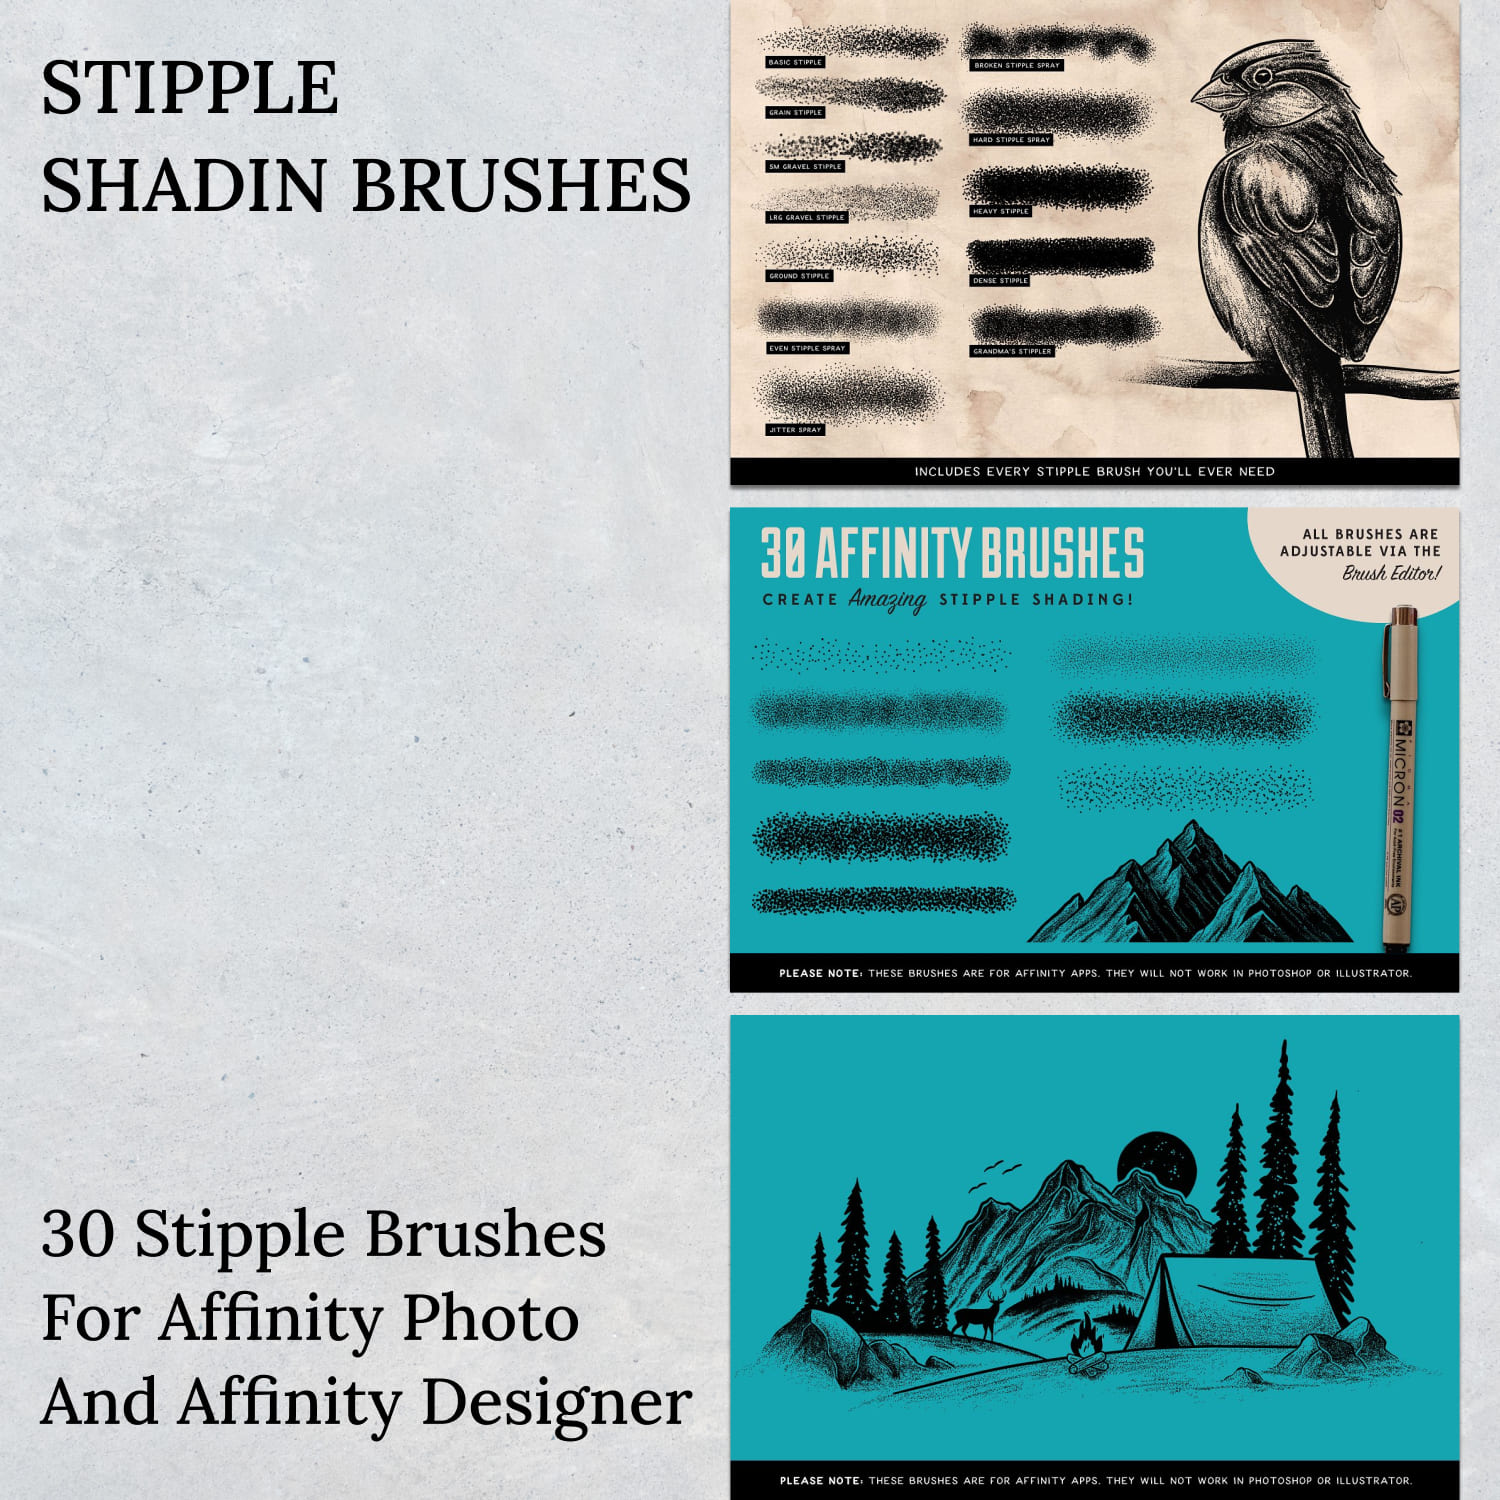 Stipple Shading Brushes for Affinity - main image preview.